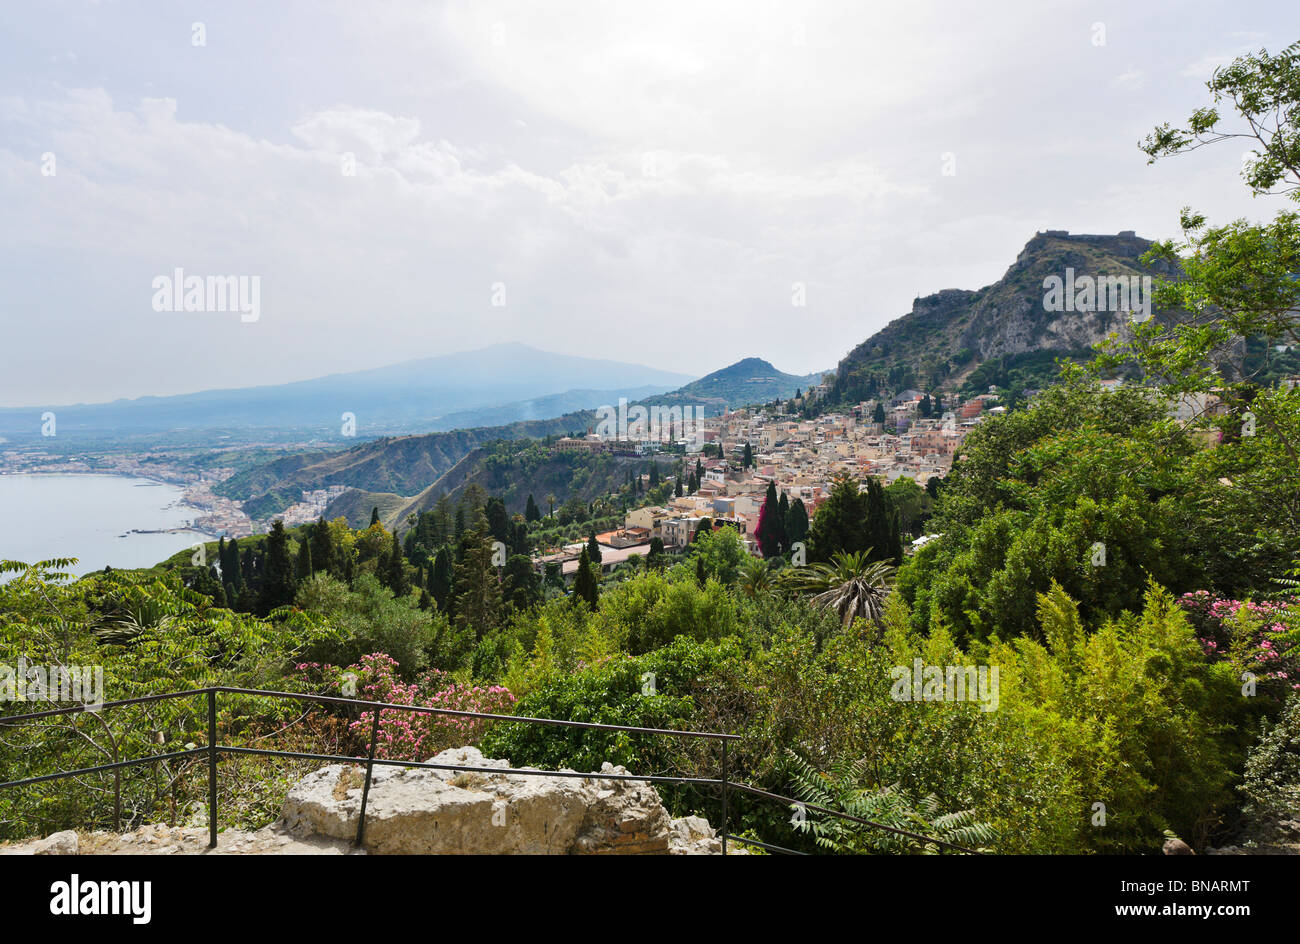 View over Taormina from the Greek Theatre (Teatro Greco) with Mount Etna in the distance, Taormina, Sicily, Italy Stock Photo